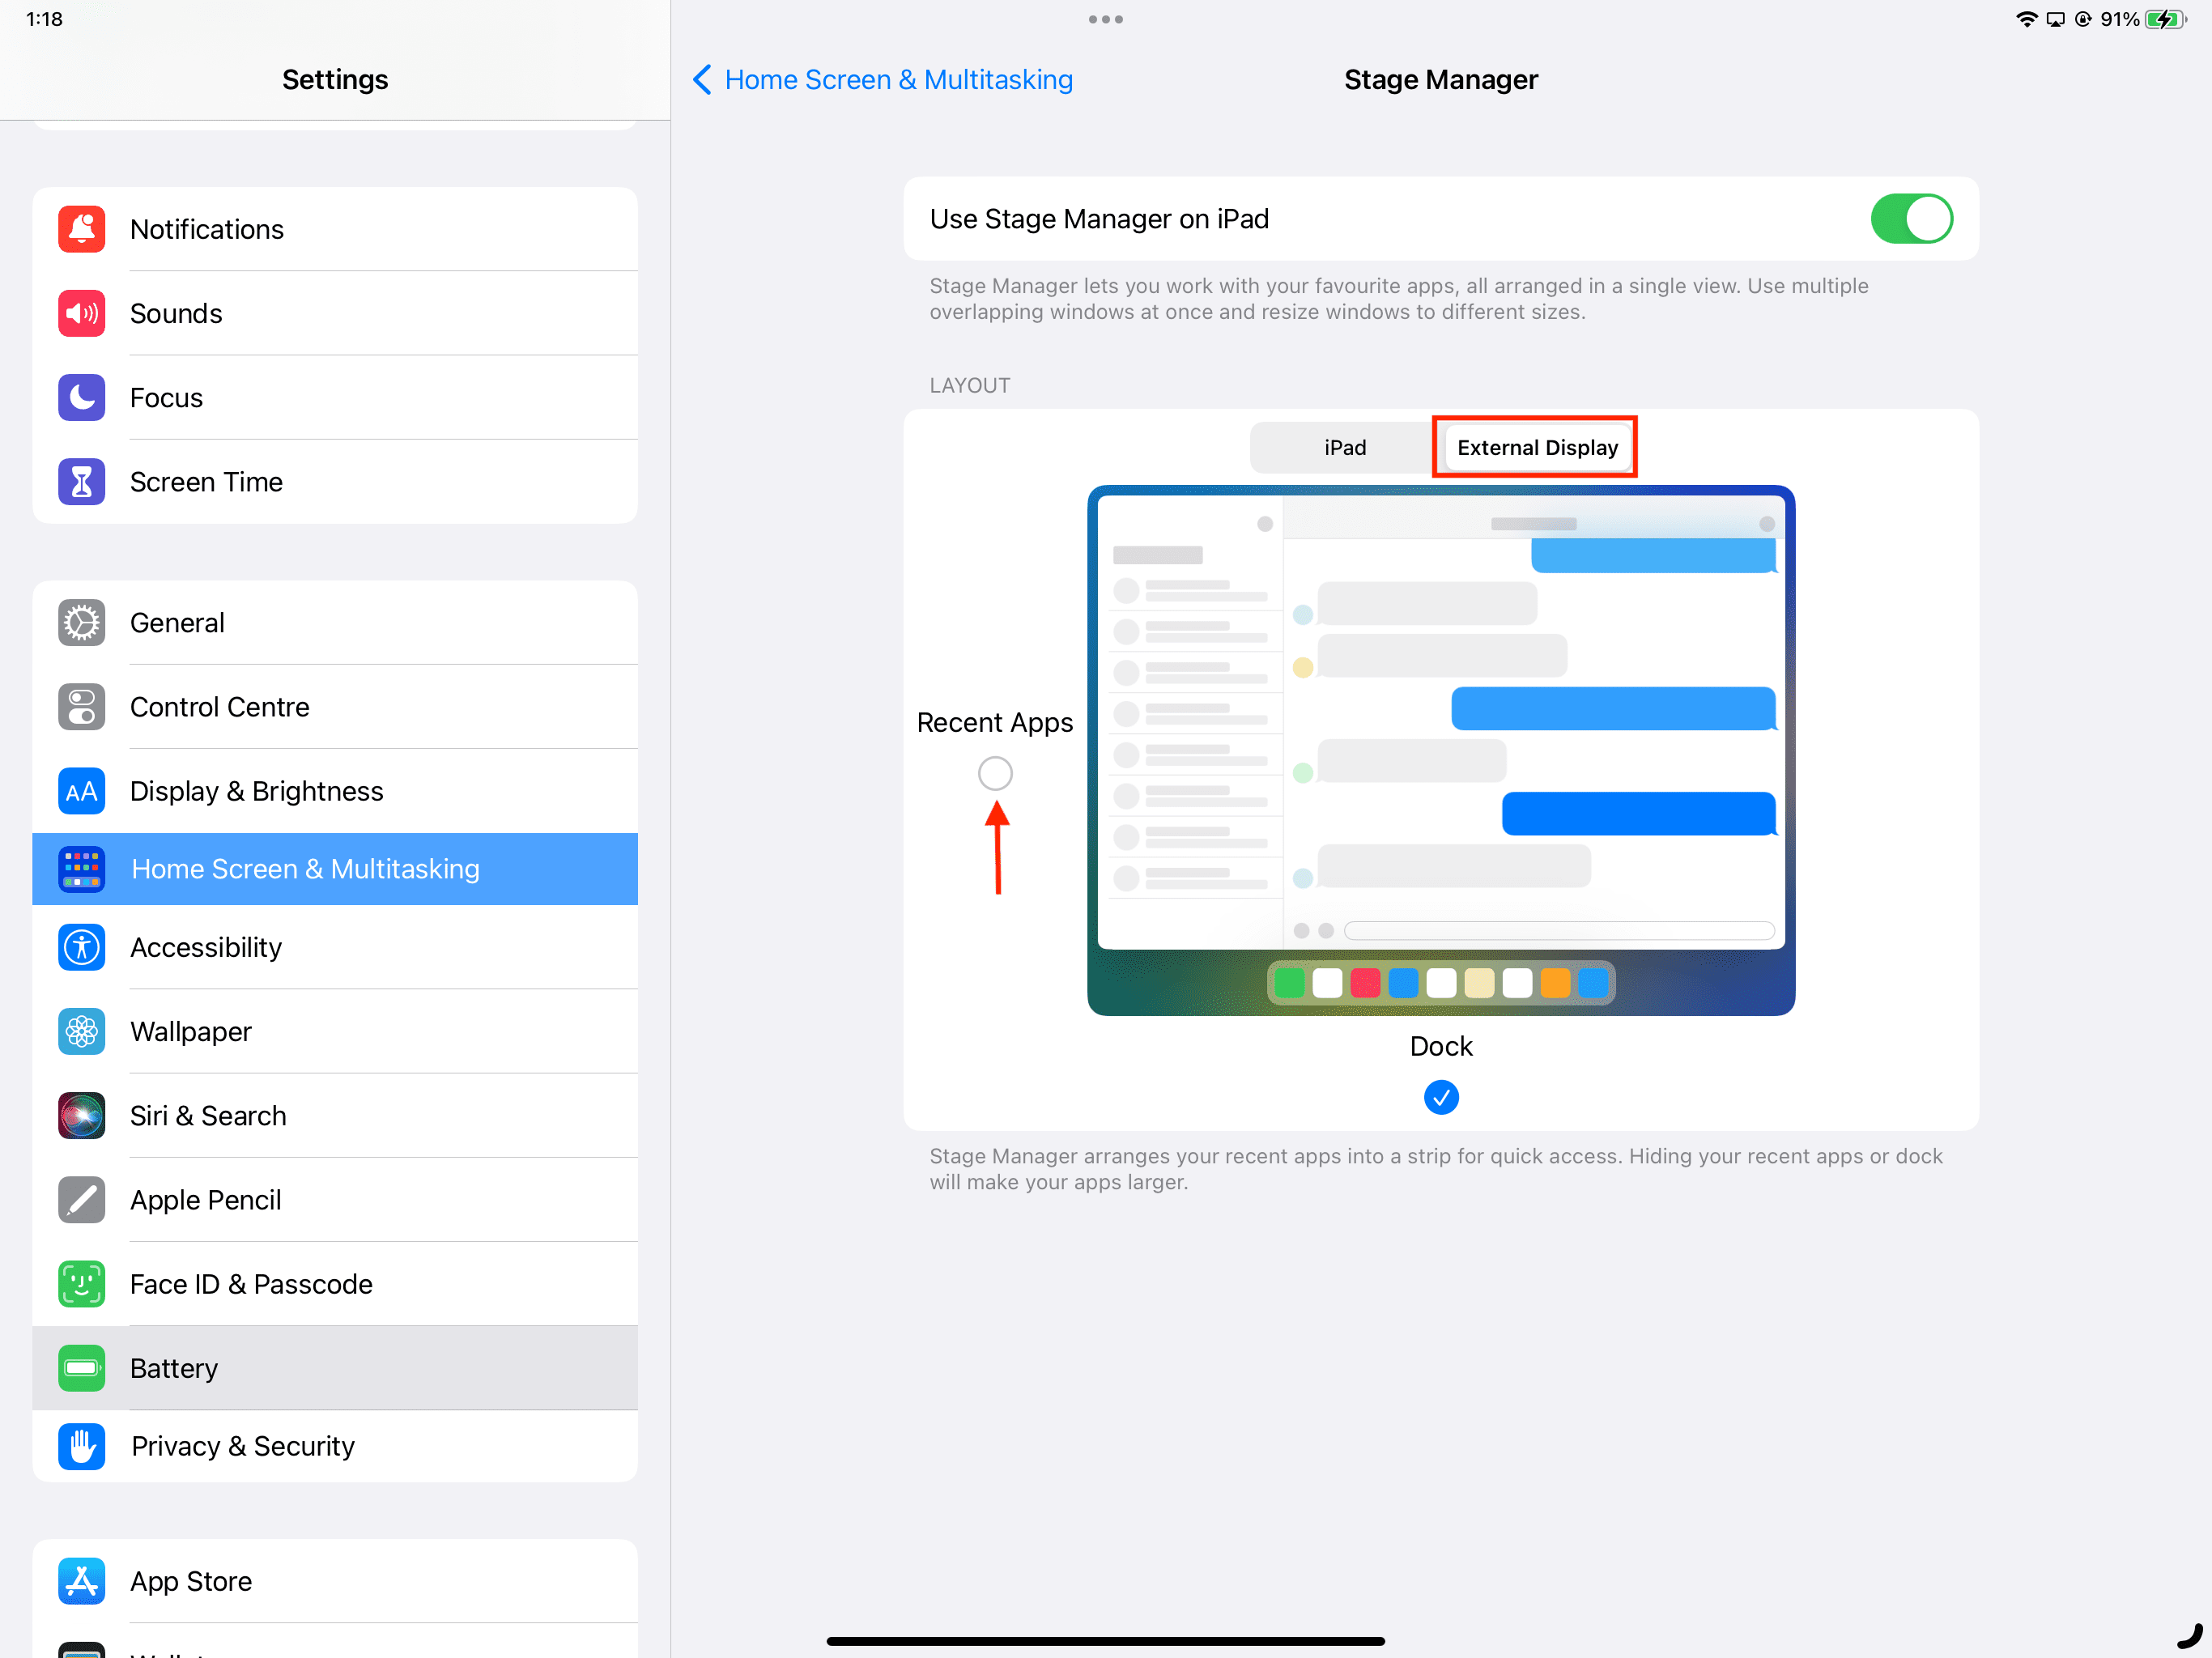 Hide Stage Manager sidebar from showing on iPad's external display